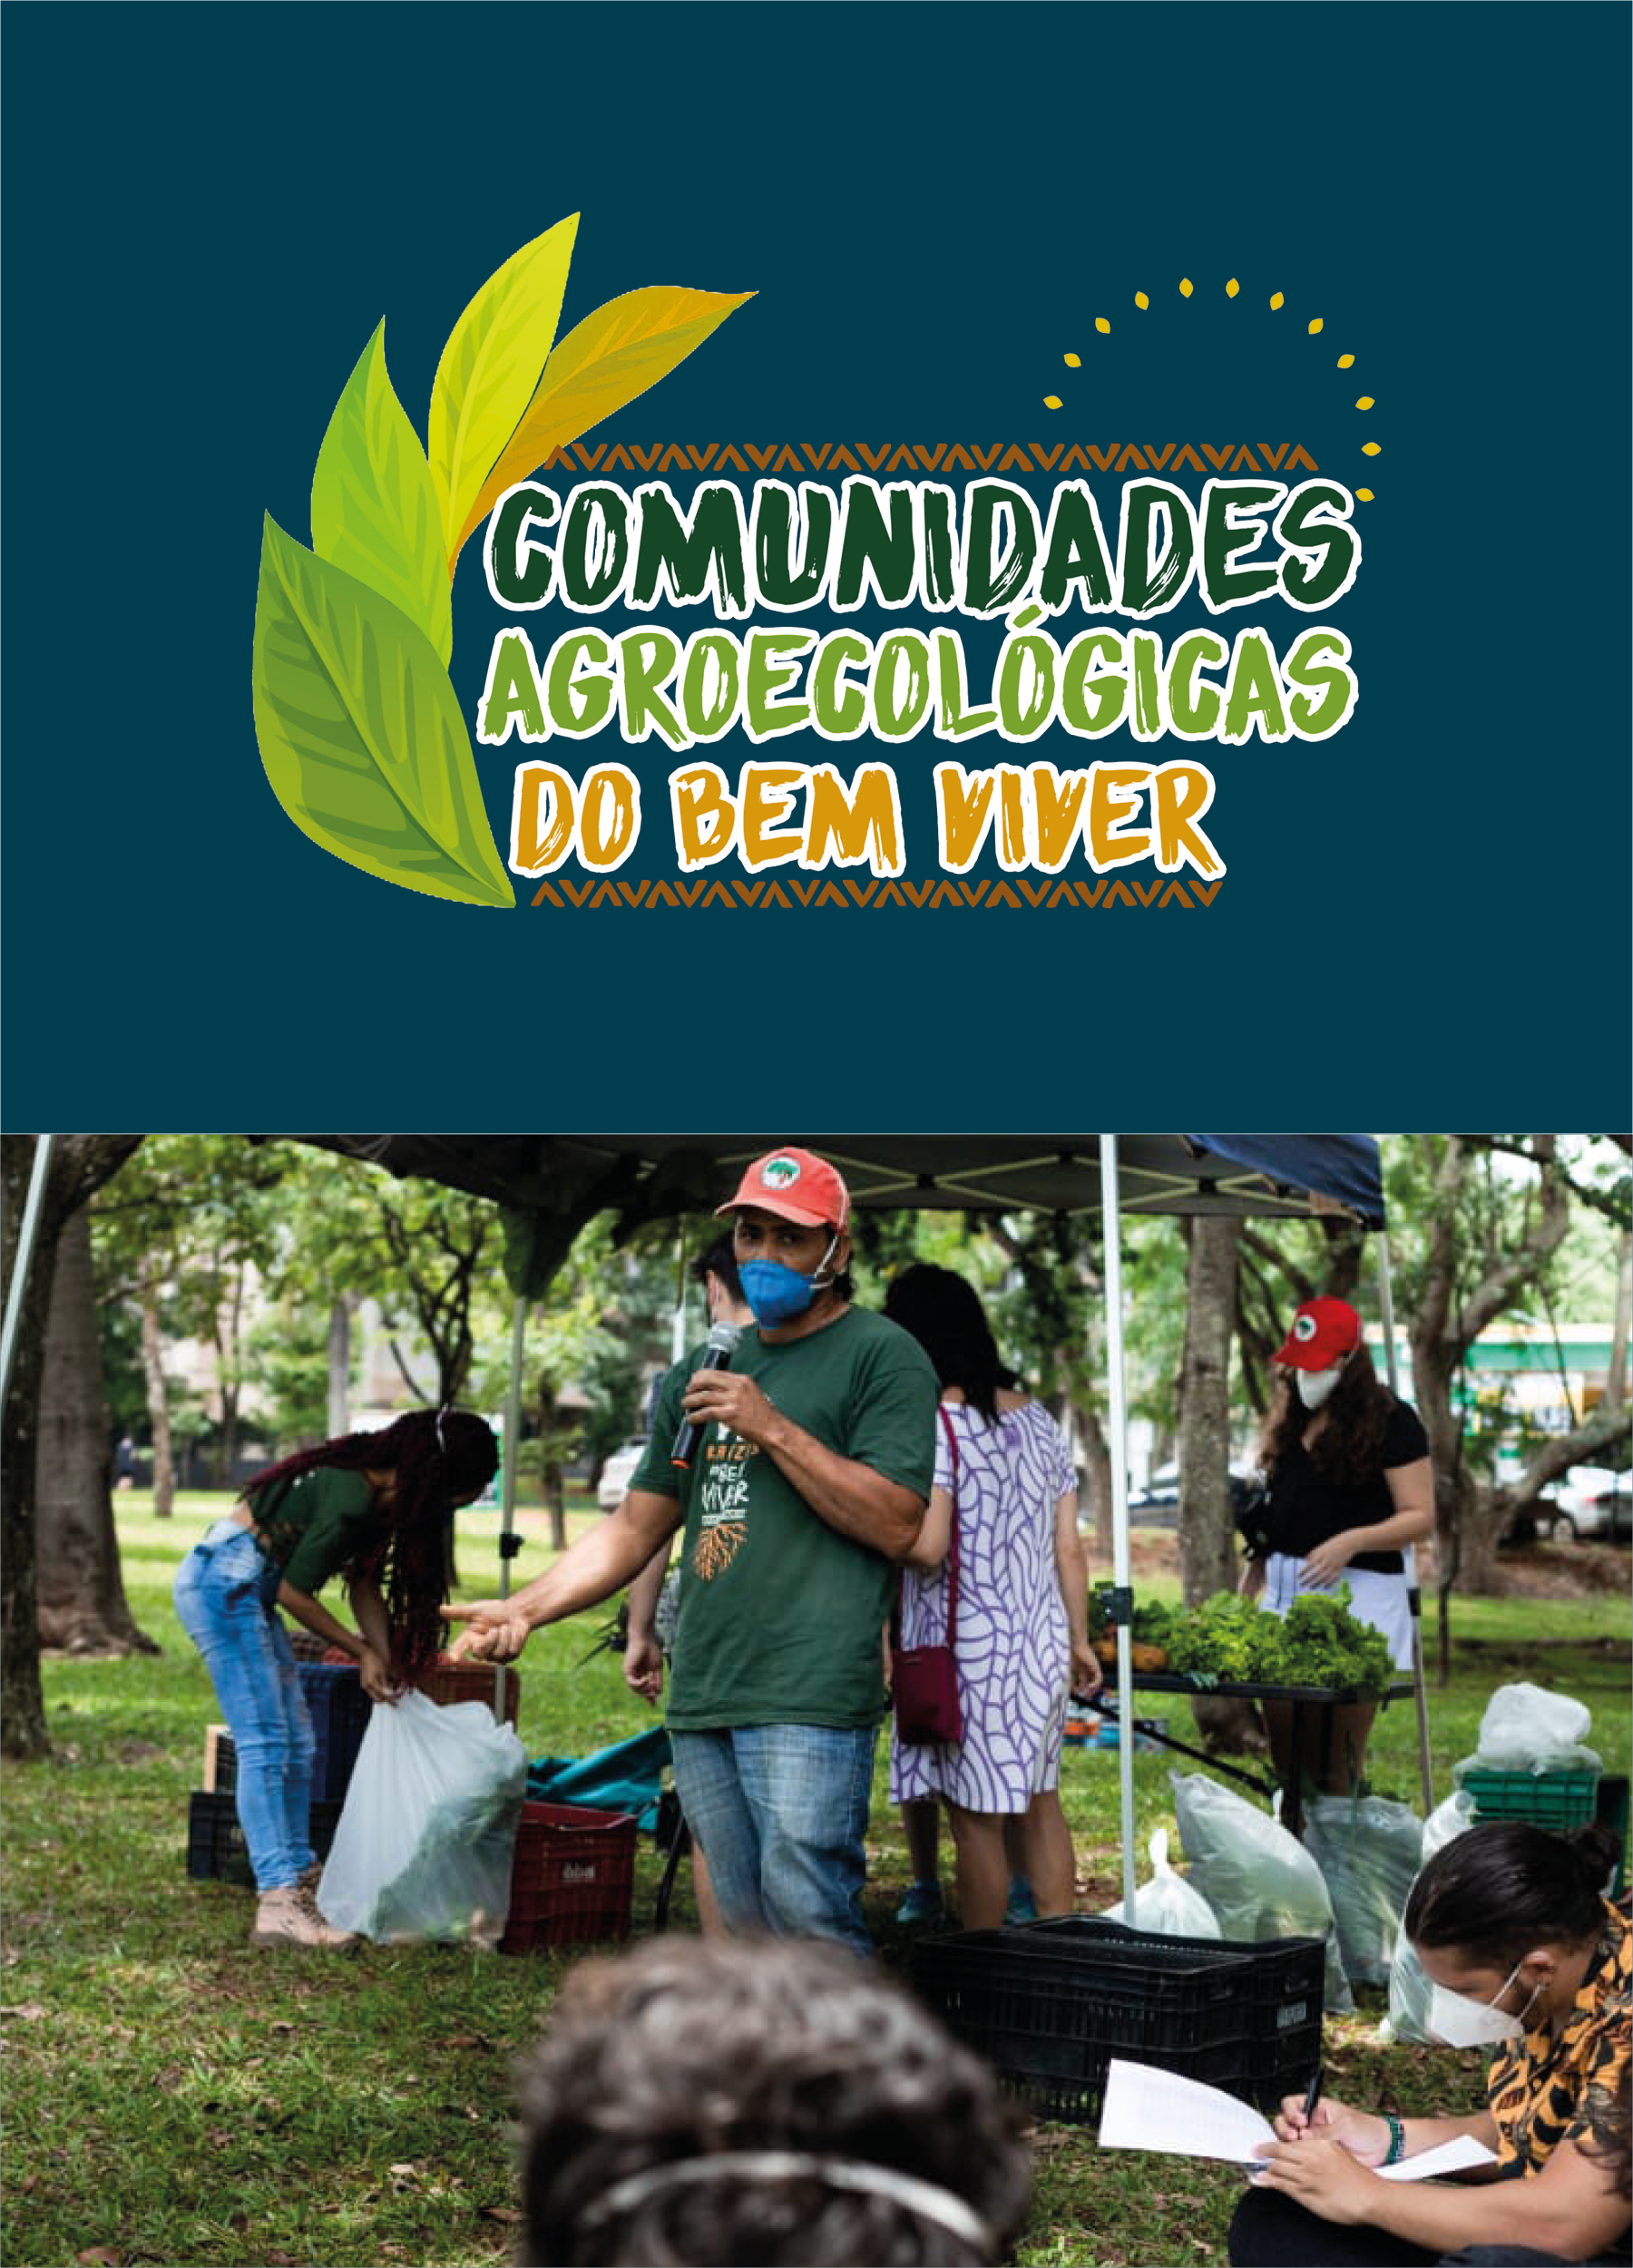 Comunidades Agroecológicas do Bem Viver logo with a photograph of the crops and community gathering 